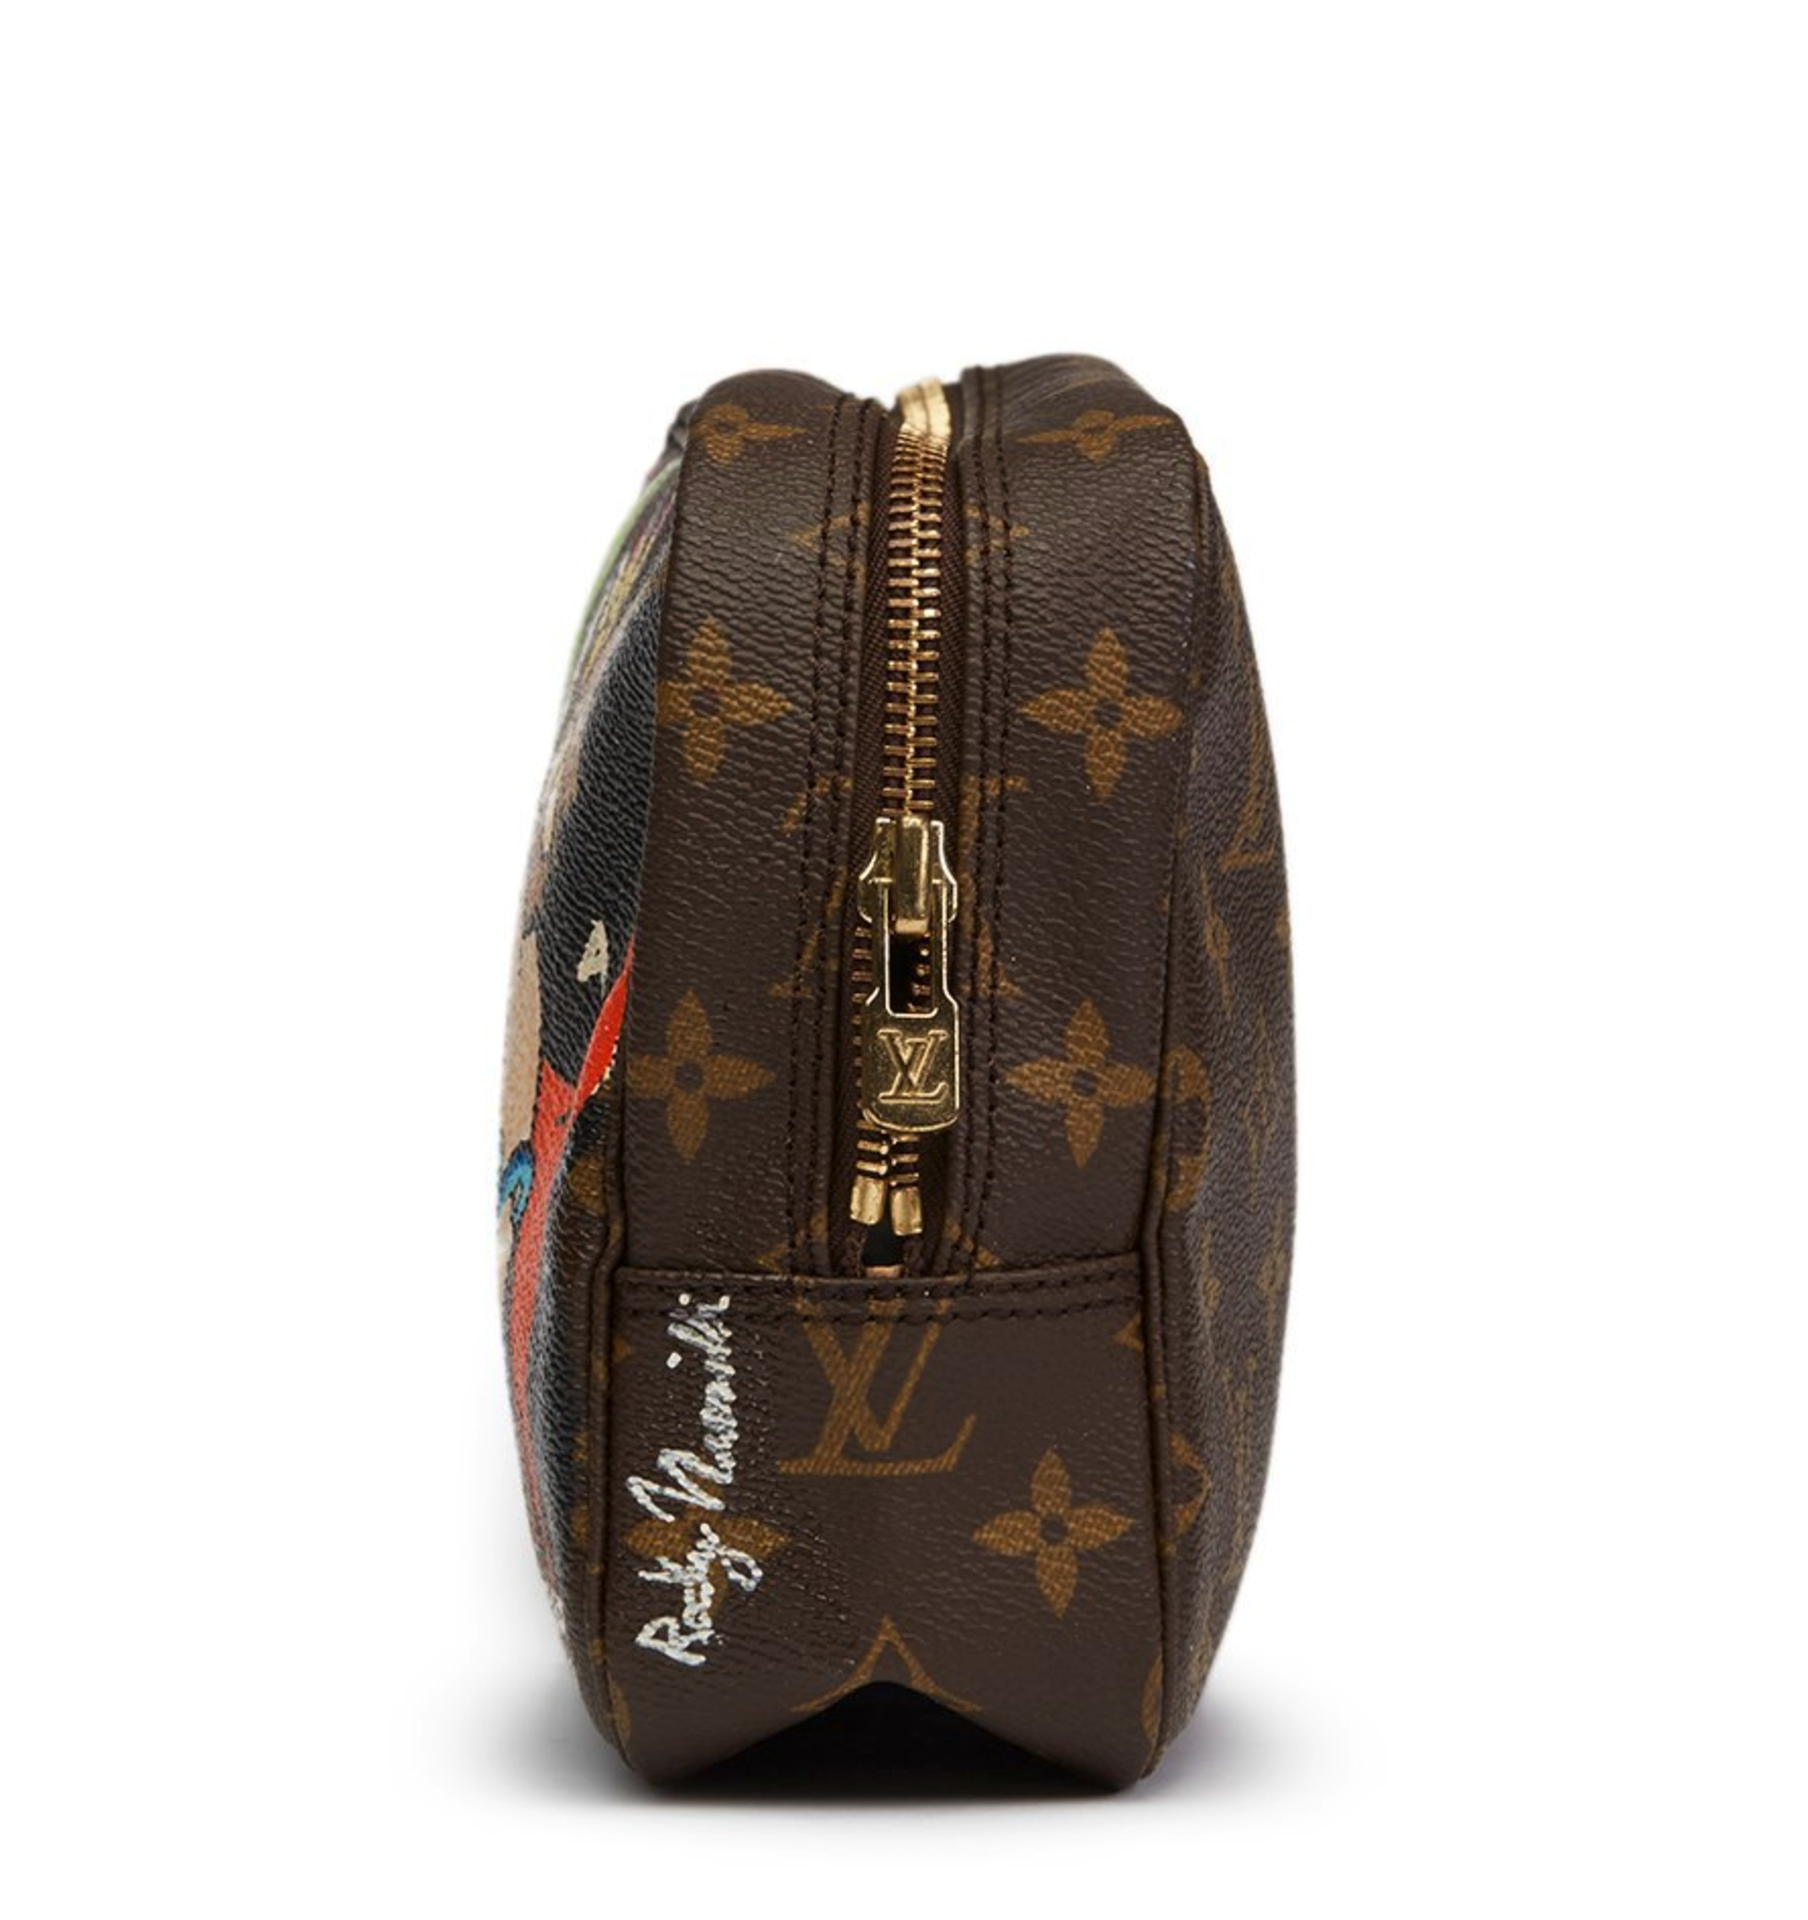 Louis Vuitton Hand-Painted 'Sick Of It All' X Year Zero London Toiletry Pouch - Image 6 of 11